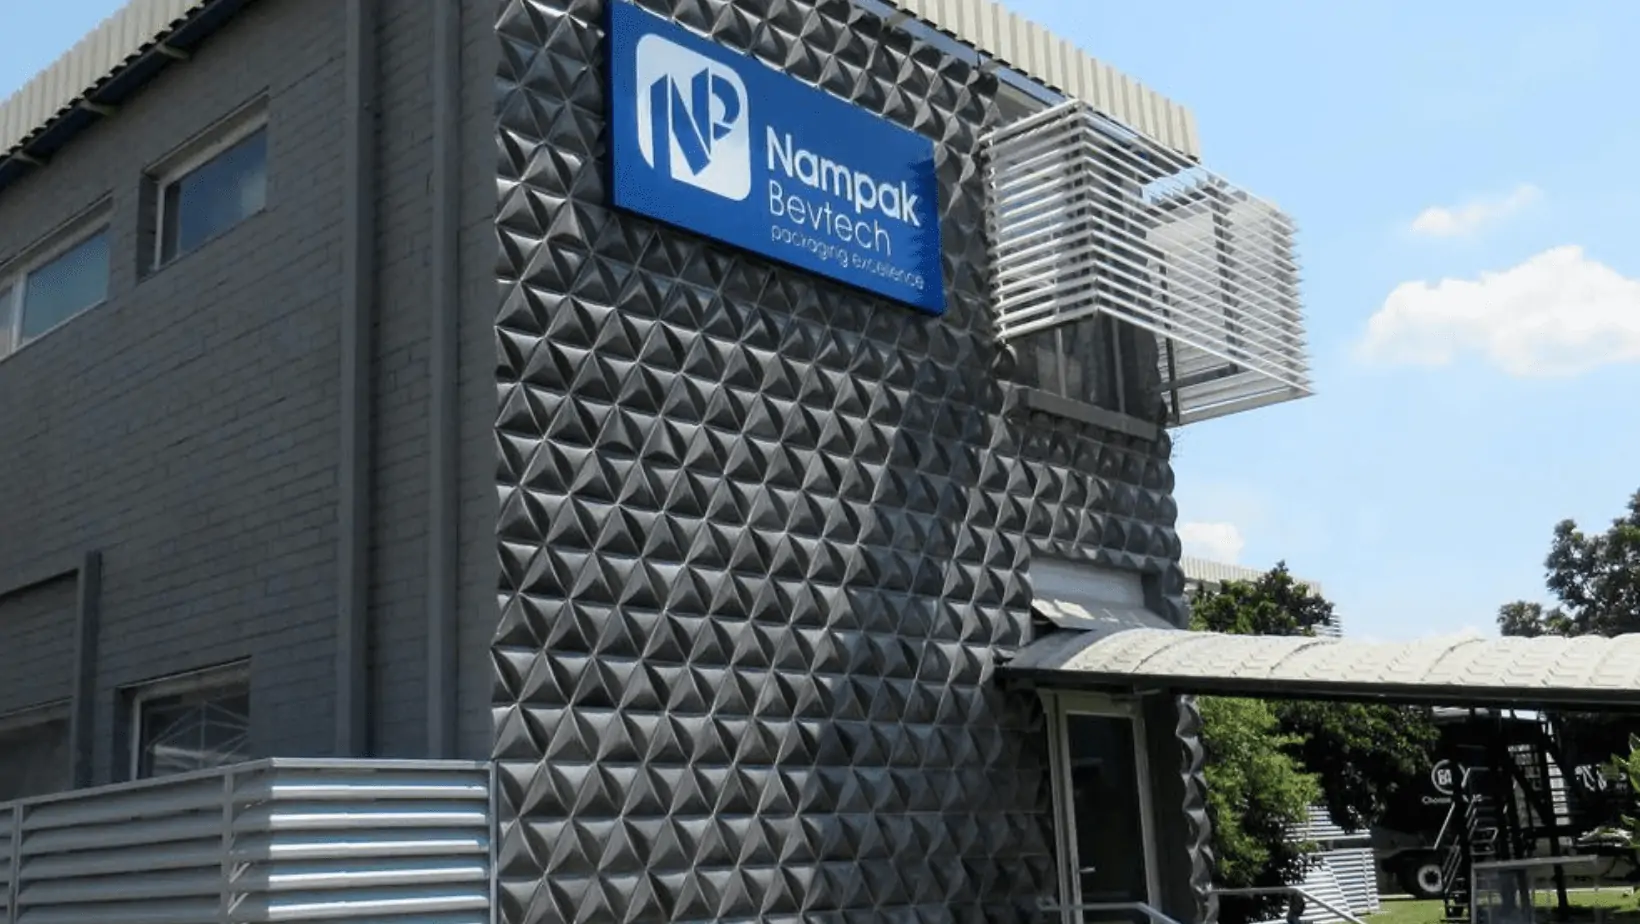 Nampak Limited Shows Resilience Amidst Challenging Market Conditions